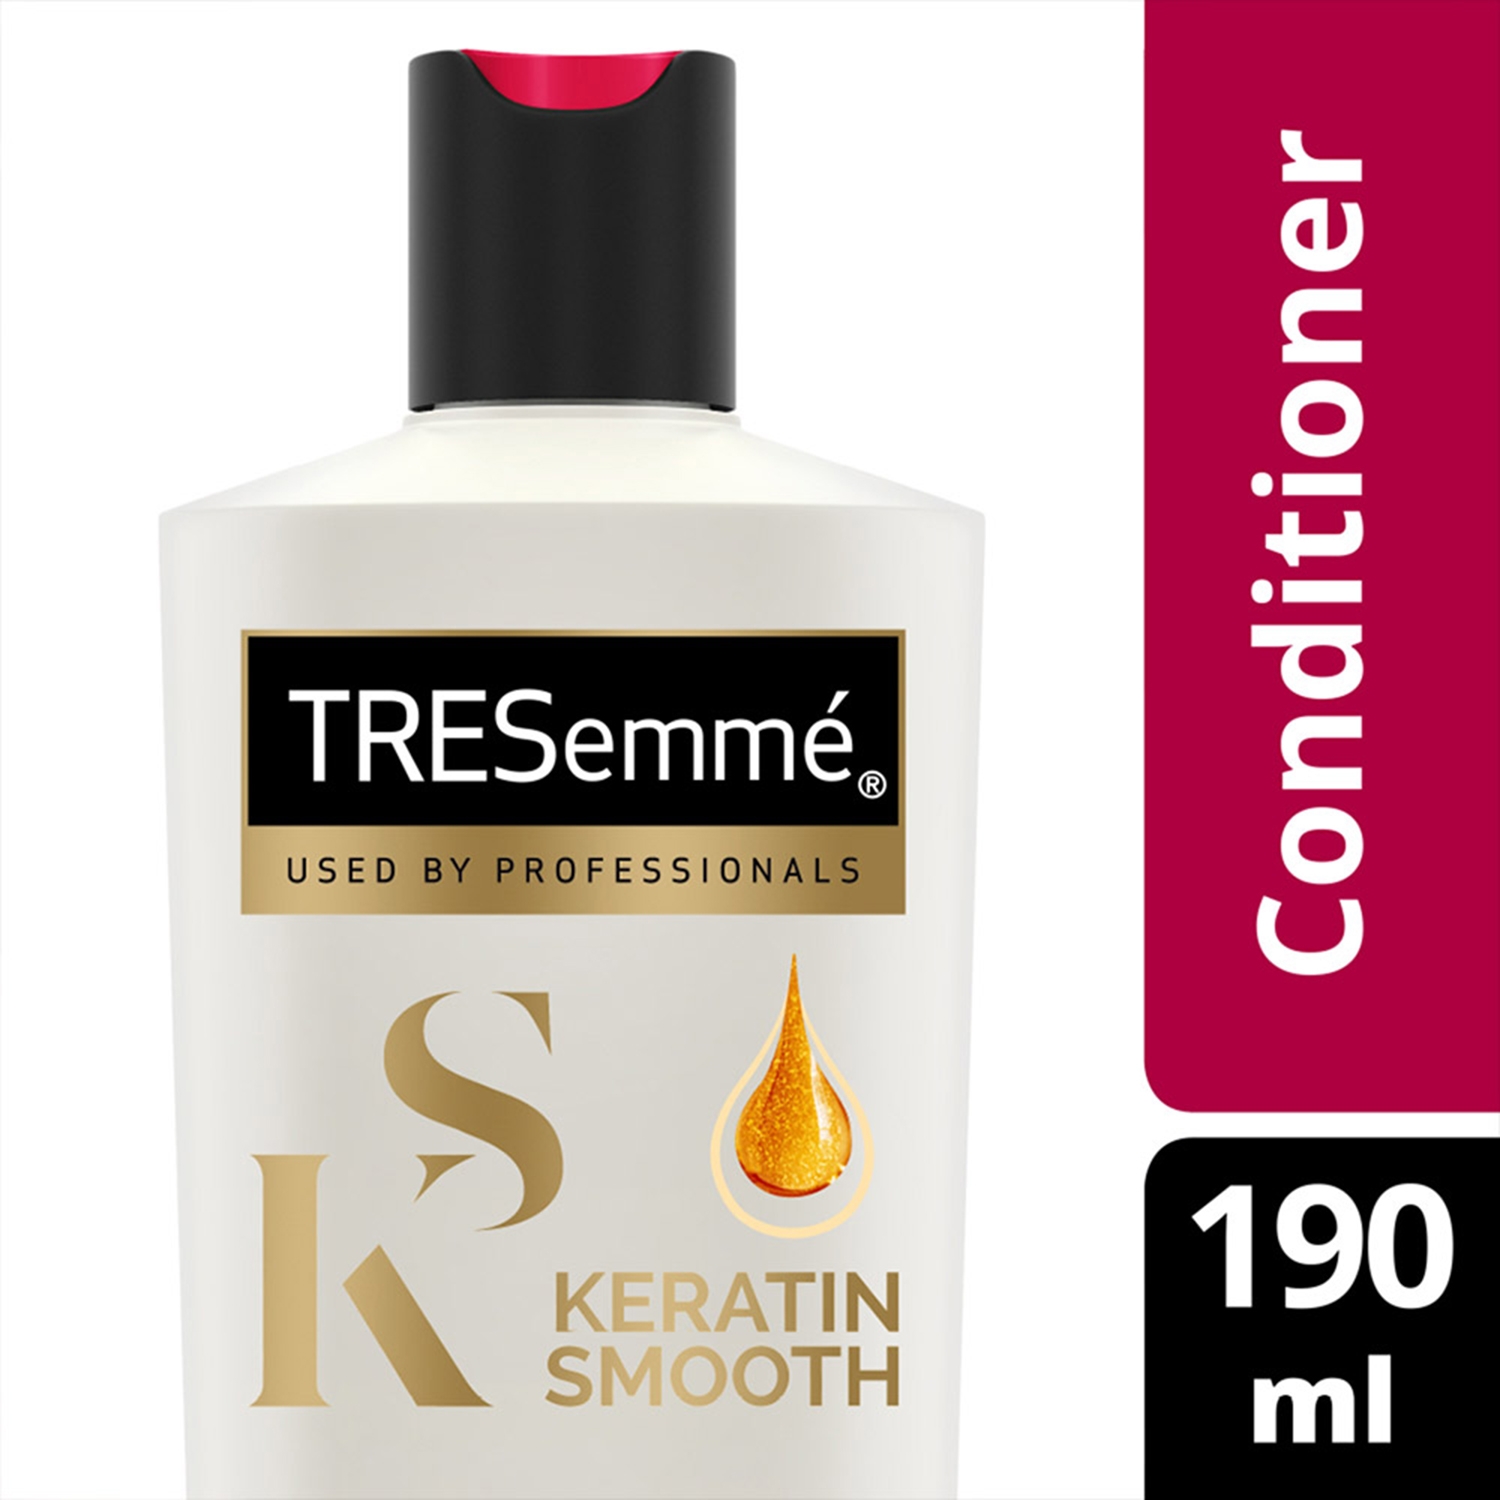 Tresemme | Tresemme Keratin Smooth Conditioner - (190ml)